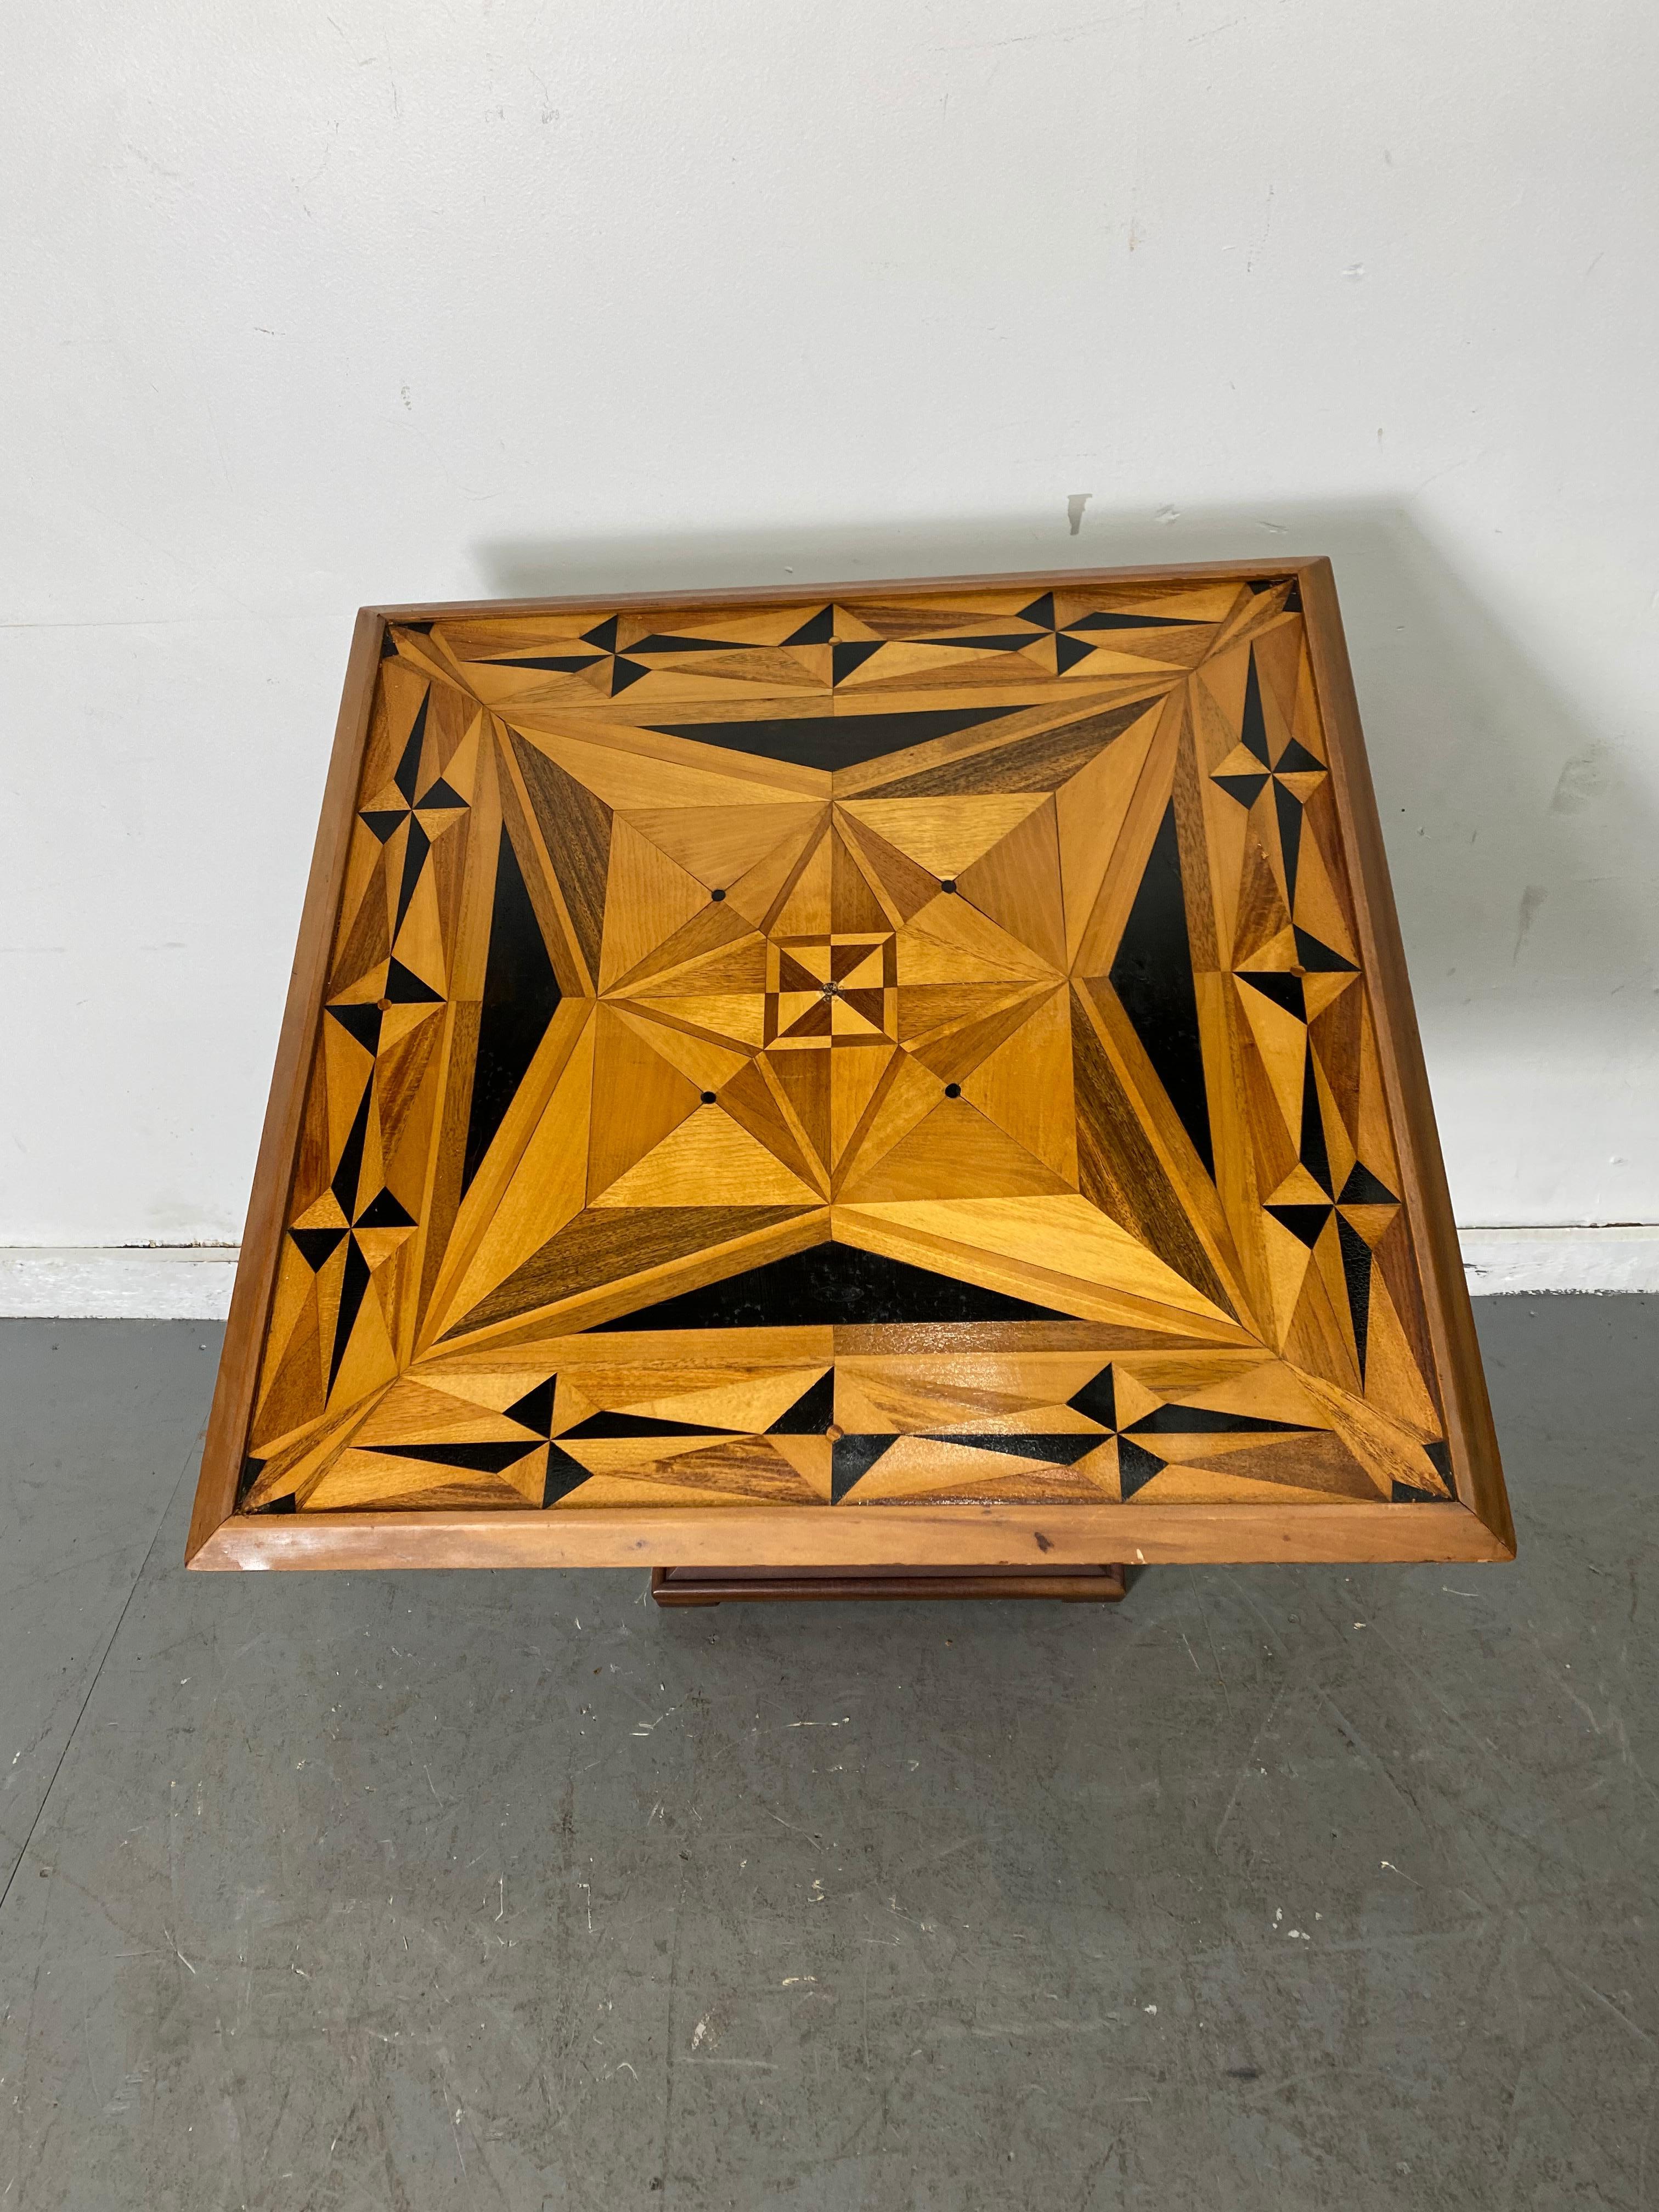 Hand-Crafted American Folk Art Geometric Inlay Marquetry Game Table, Modernist, Art Deco